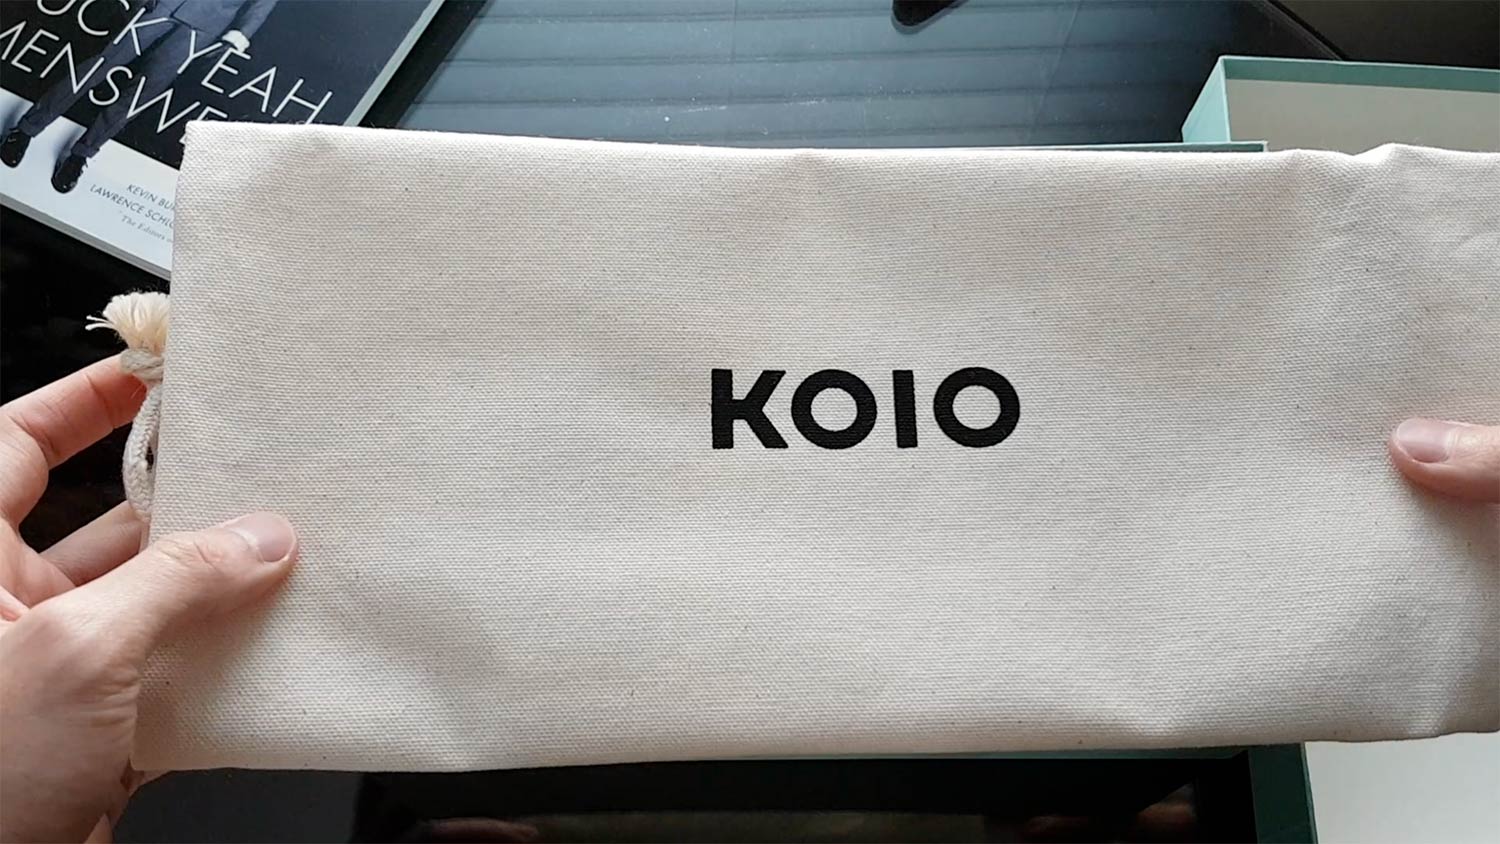 Koio Sneakers Canvas Dust Bag